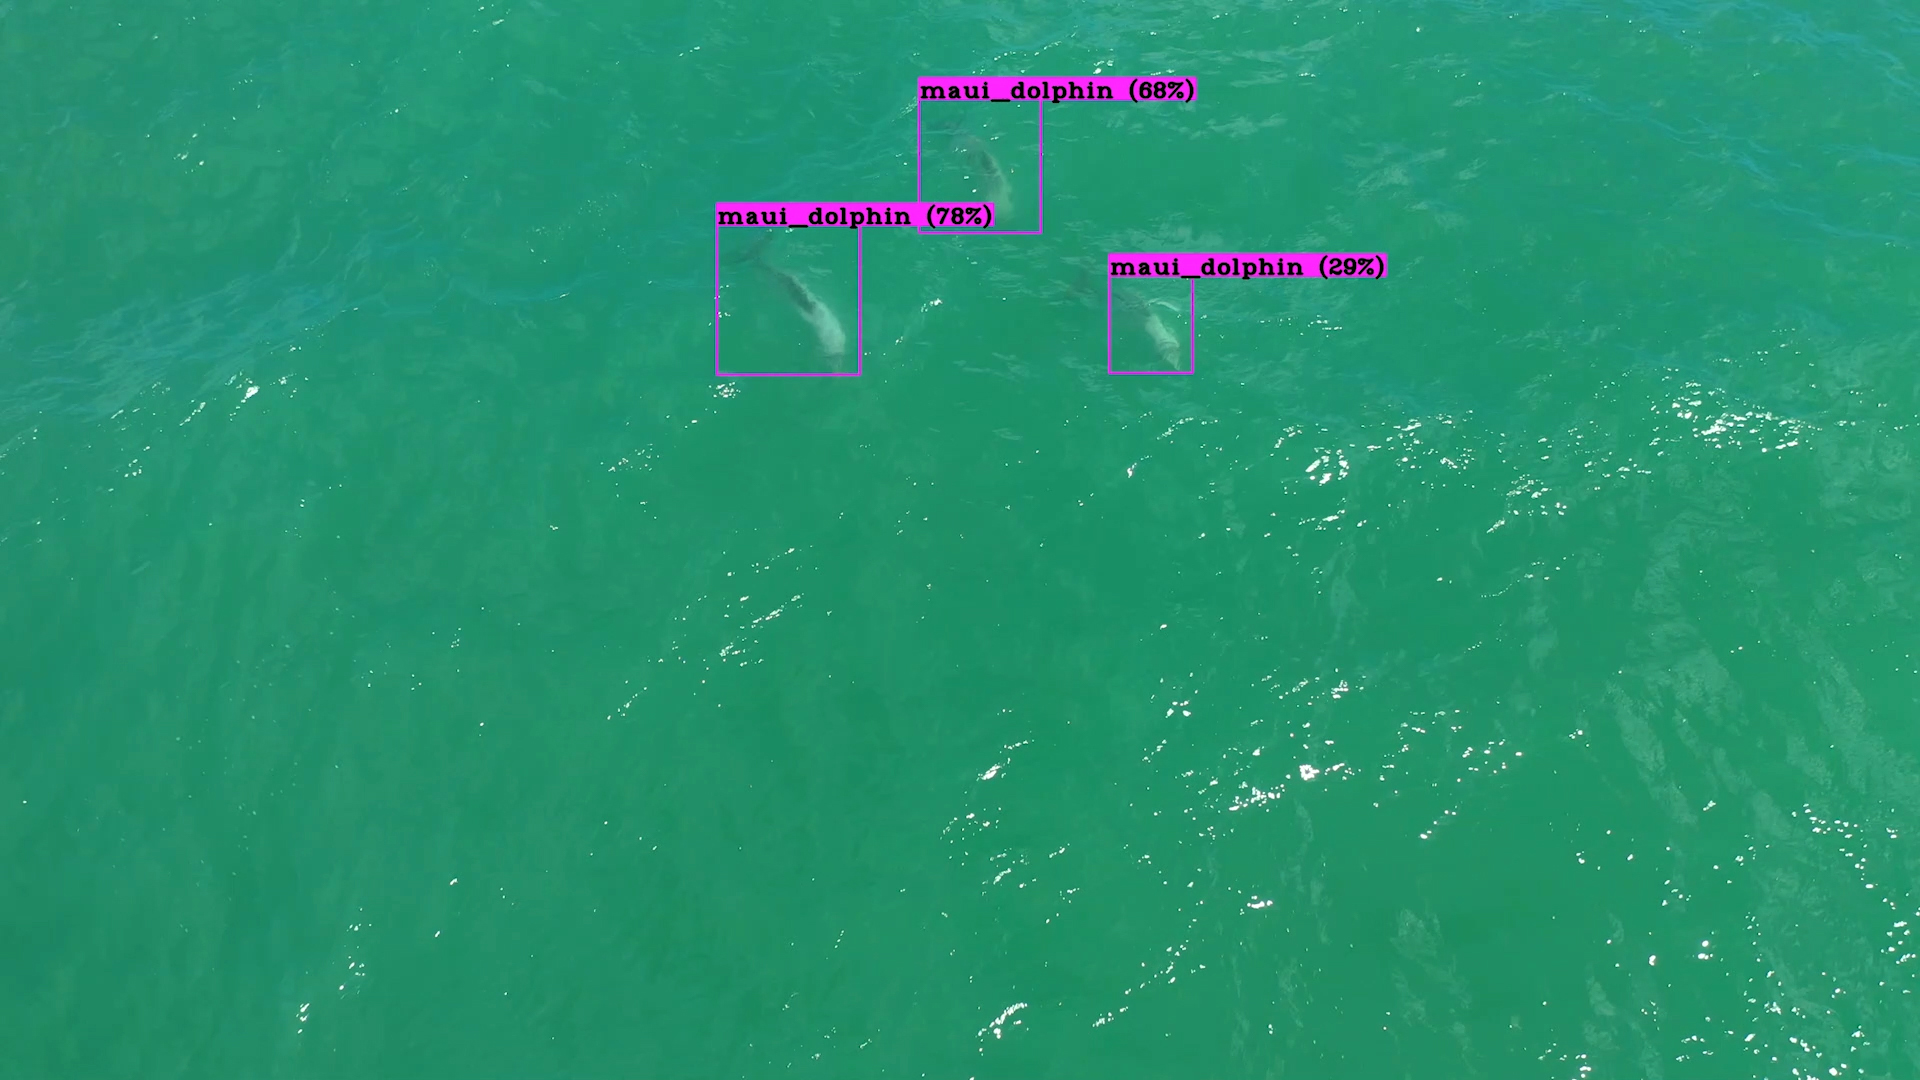 Three Maui dolphins shown underwater and and tagged from drone footage.